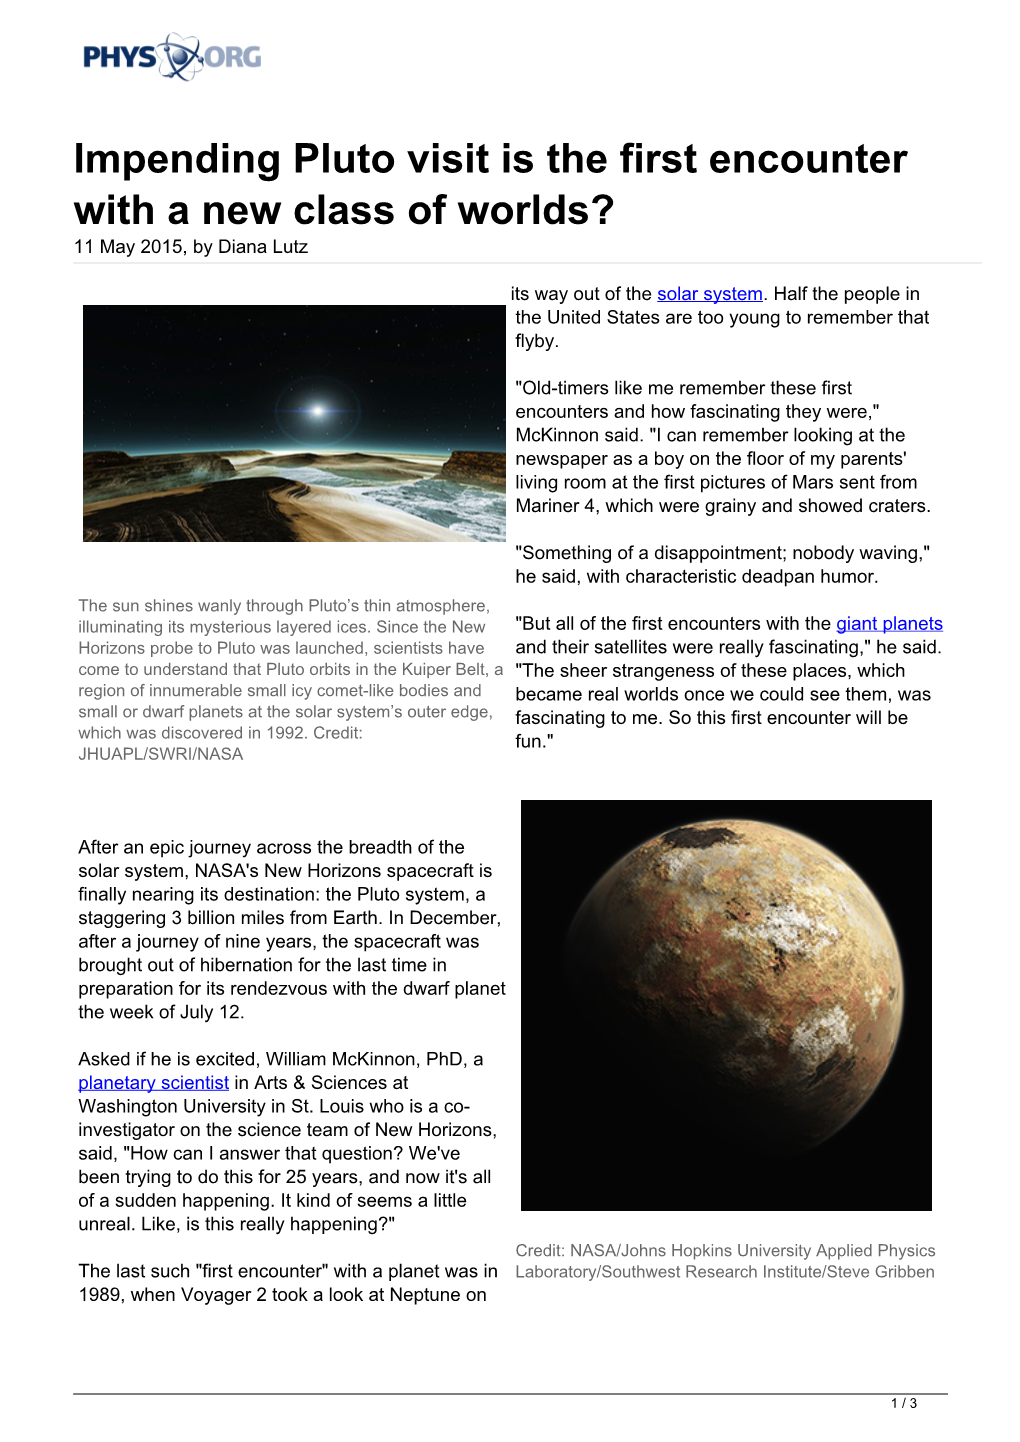 Impending Pluto Visit Is the First Encounter with a New Class of Worlds? 11 May 2015, by Diana Lutz